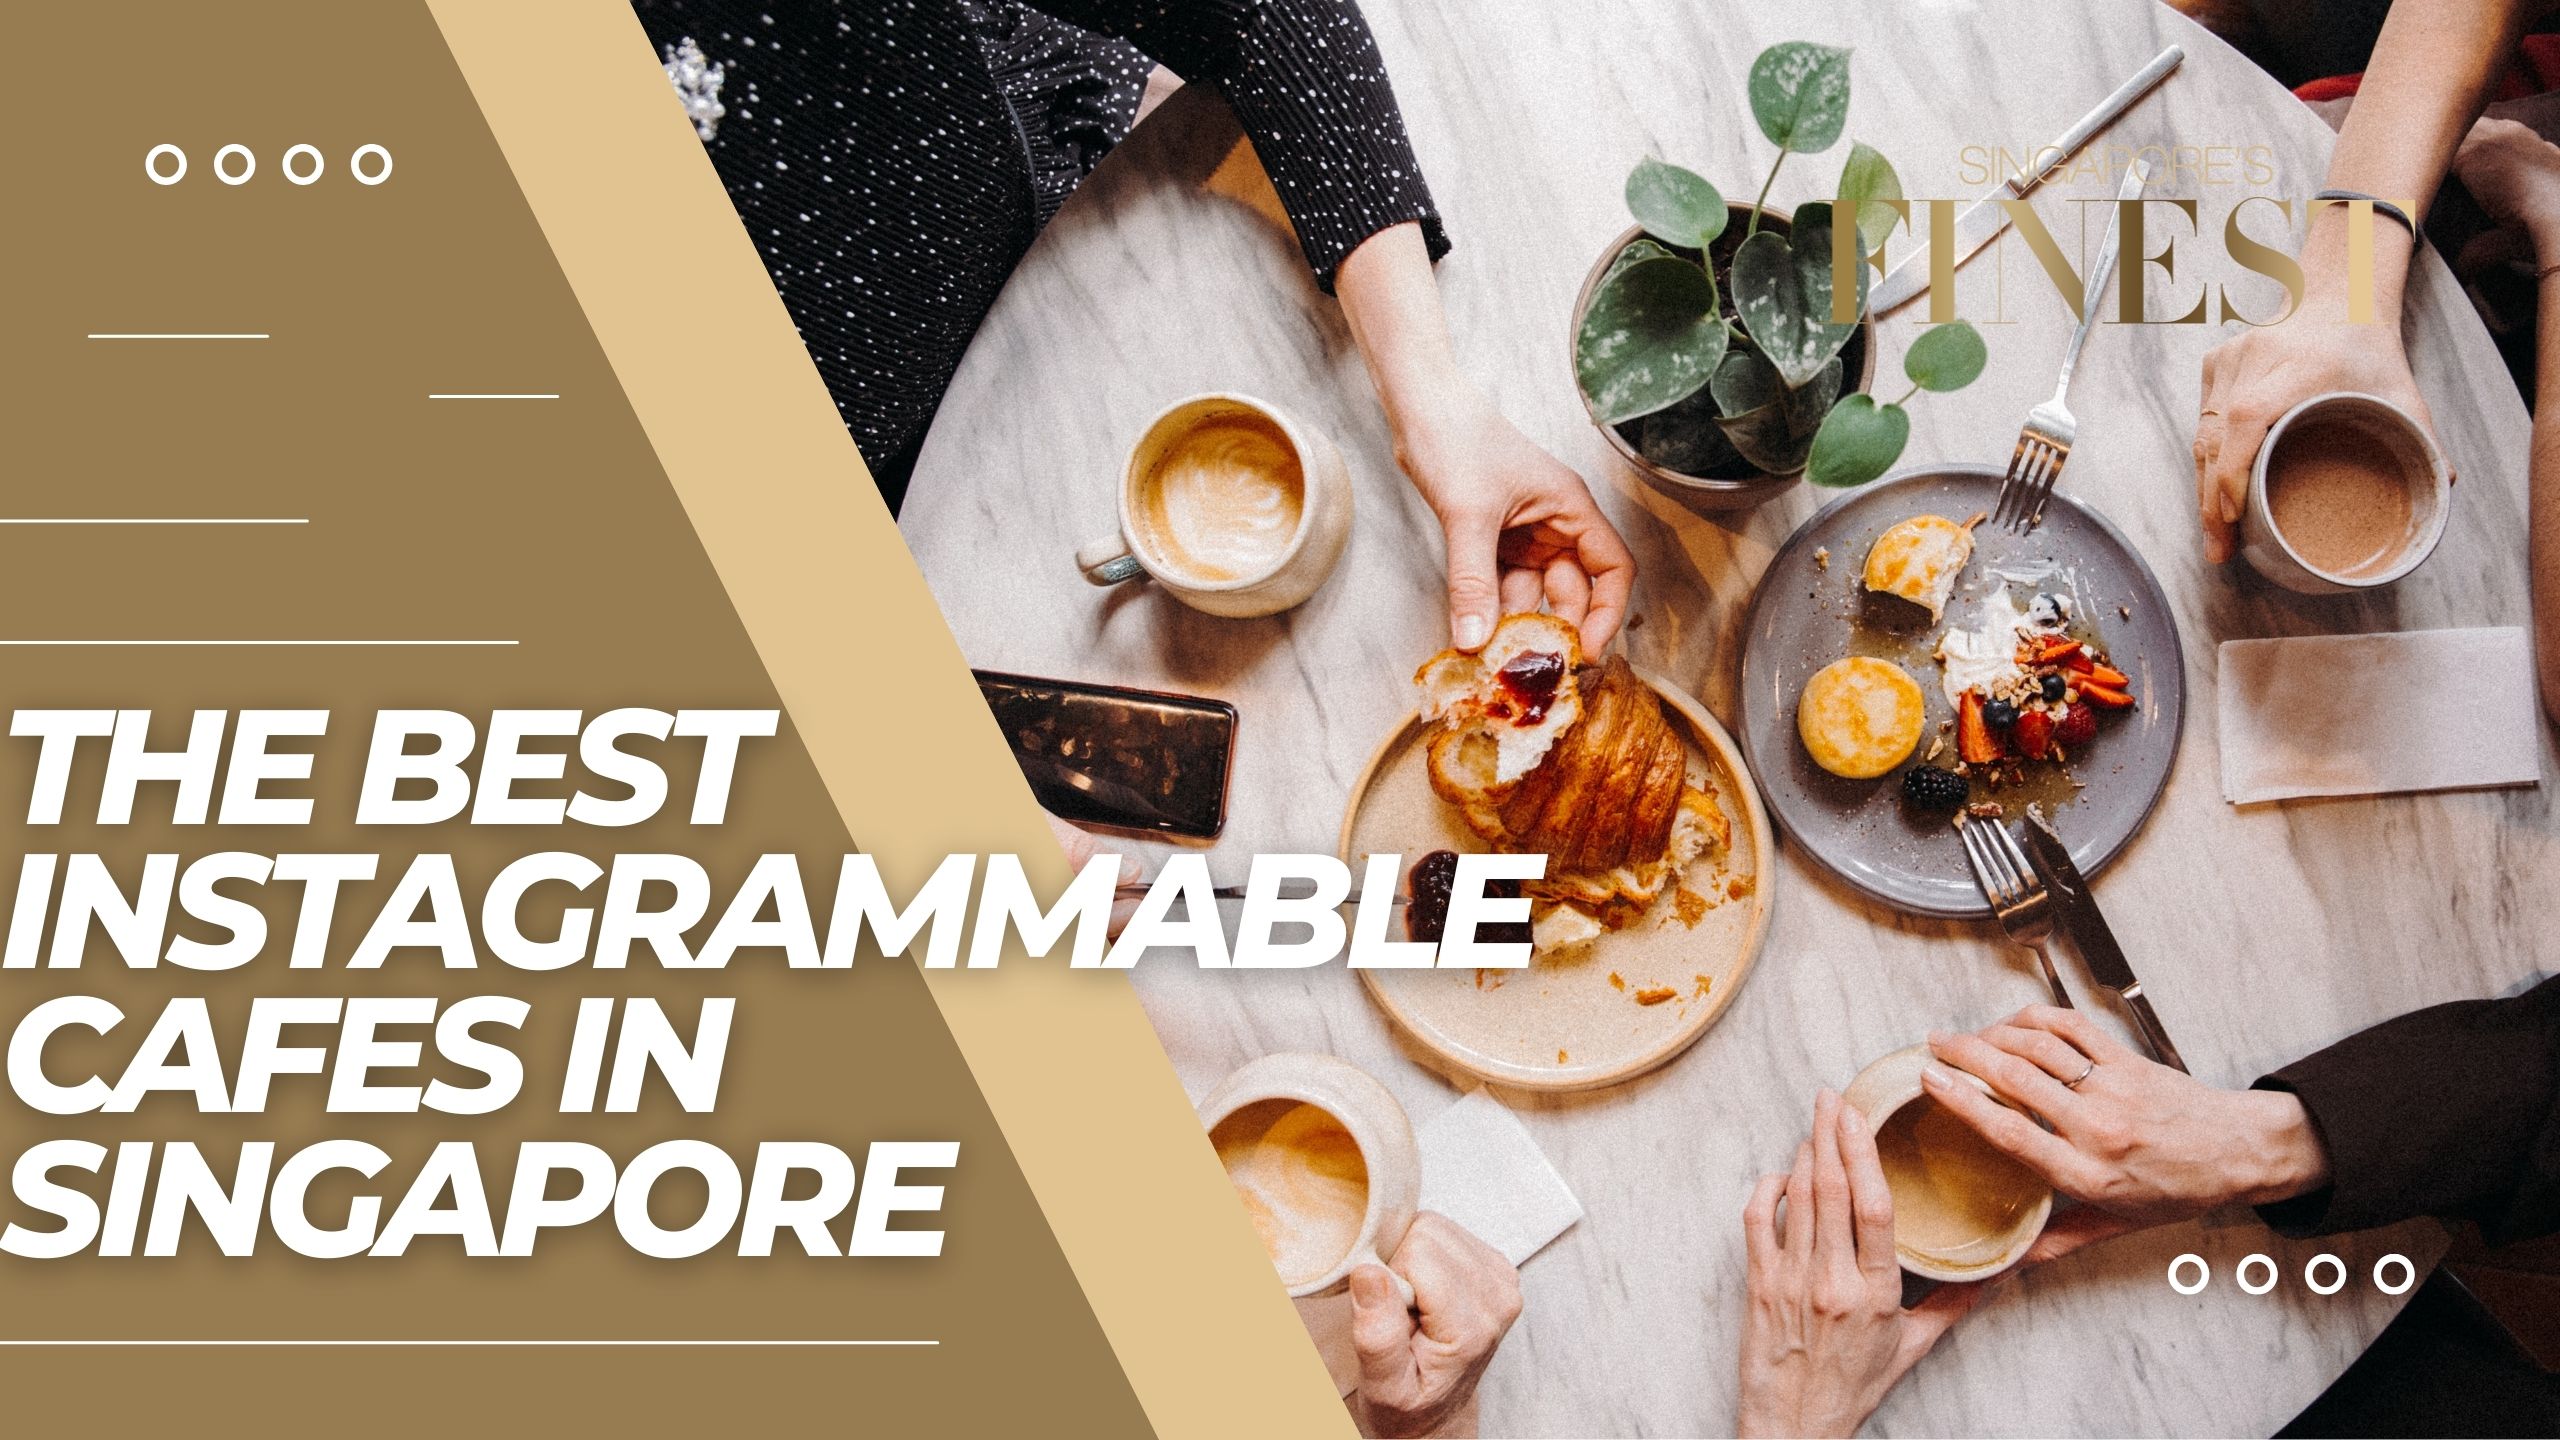 The Finest Instagrammable Cafes in Singapore